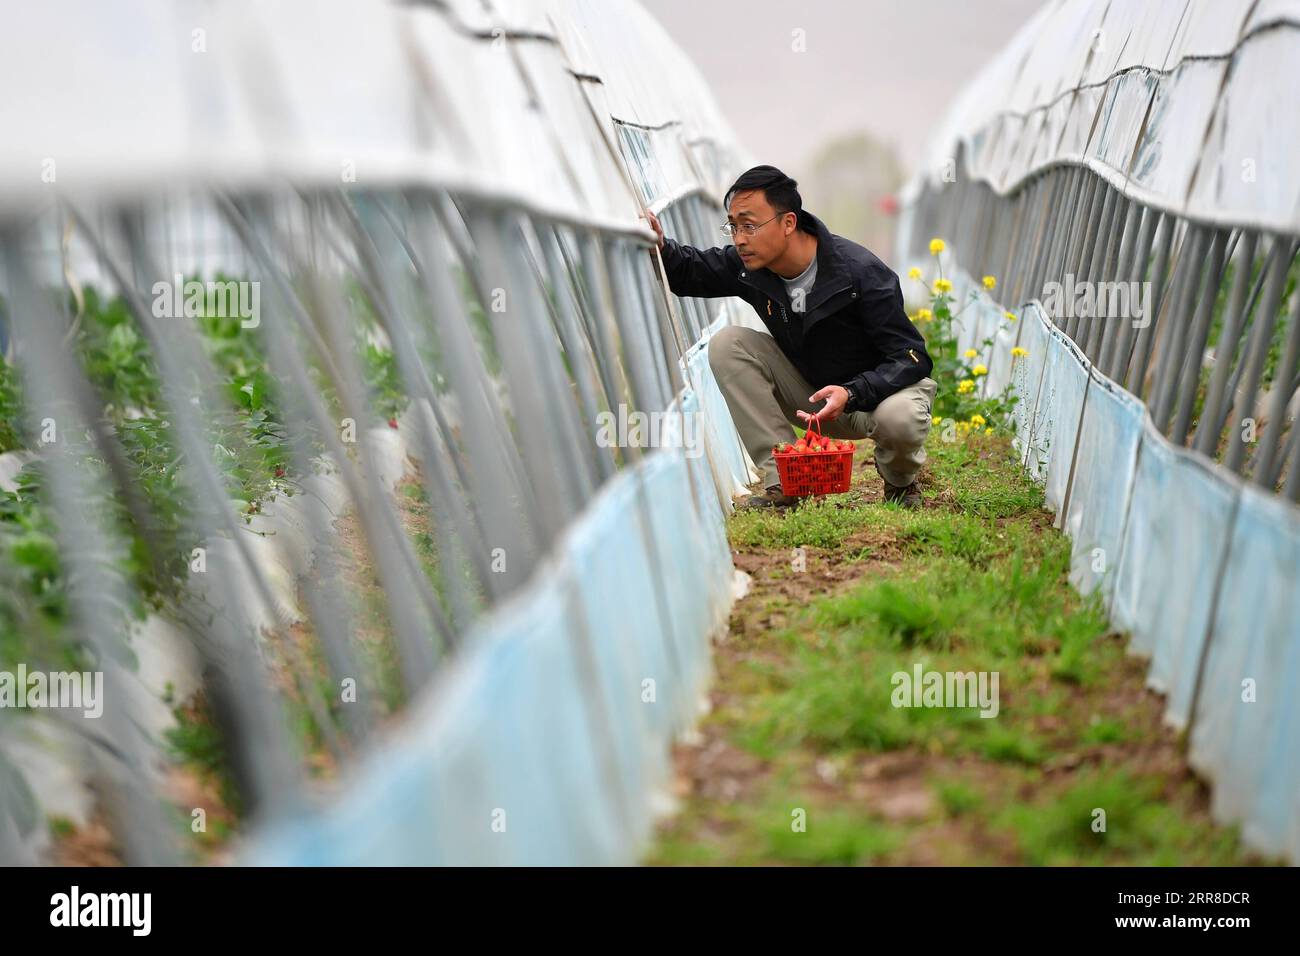 210503 -- TIANSHUI, May 3, 2021 -- Zhang Shuhao checks the growth of strawberries in Mudan Township, Tianshui City of northwest China s Gansu Province, on April 27, 2021. Zhang Shuhao, 42, quit his well-paid job three years ago to start an agriculture company with a few partners sharing the same vision at a mountainous village in Mudan Township, Tianshui City. In three years, Xinghuarong, Zhang s company, contracted 6,200 mu about 413 hectares of idle arable lands, where terraced fields, greenhouses, and a reservoir have been built to grow diverse produces ranging from traditional Chinese medi Stock Photo